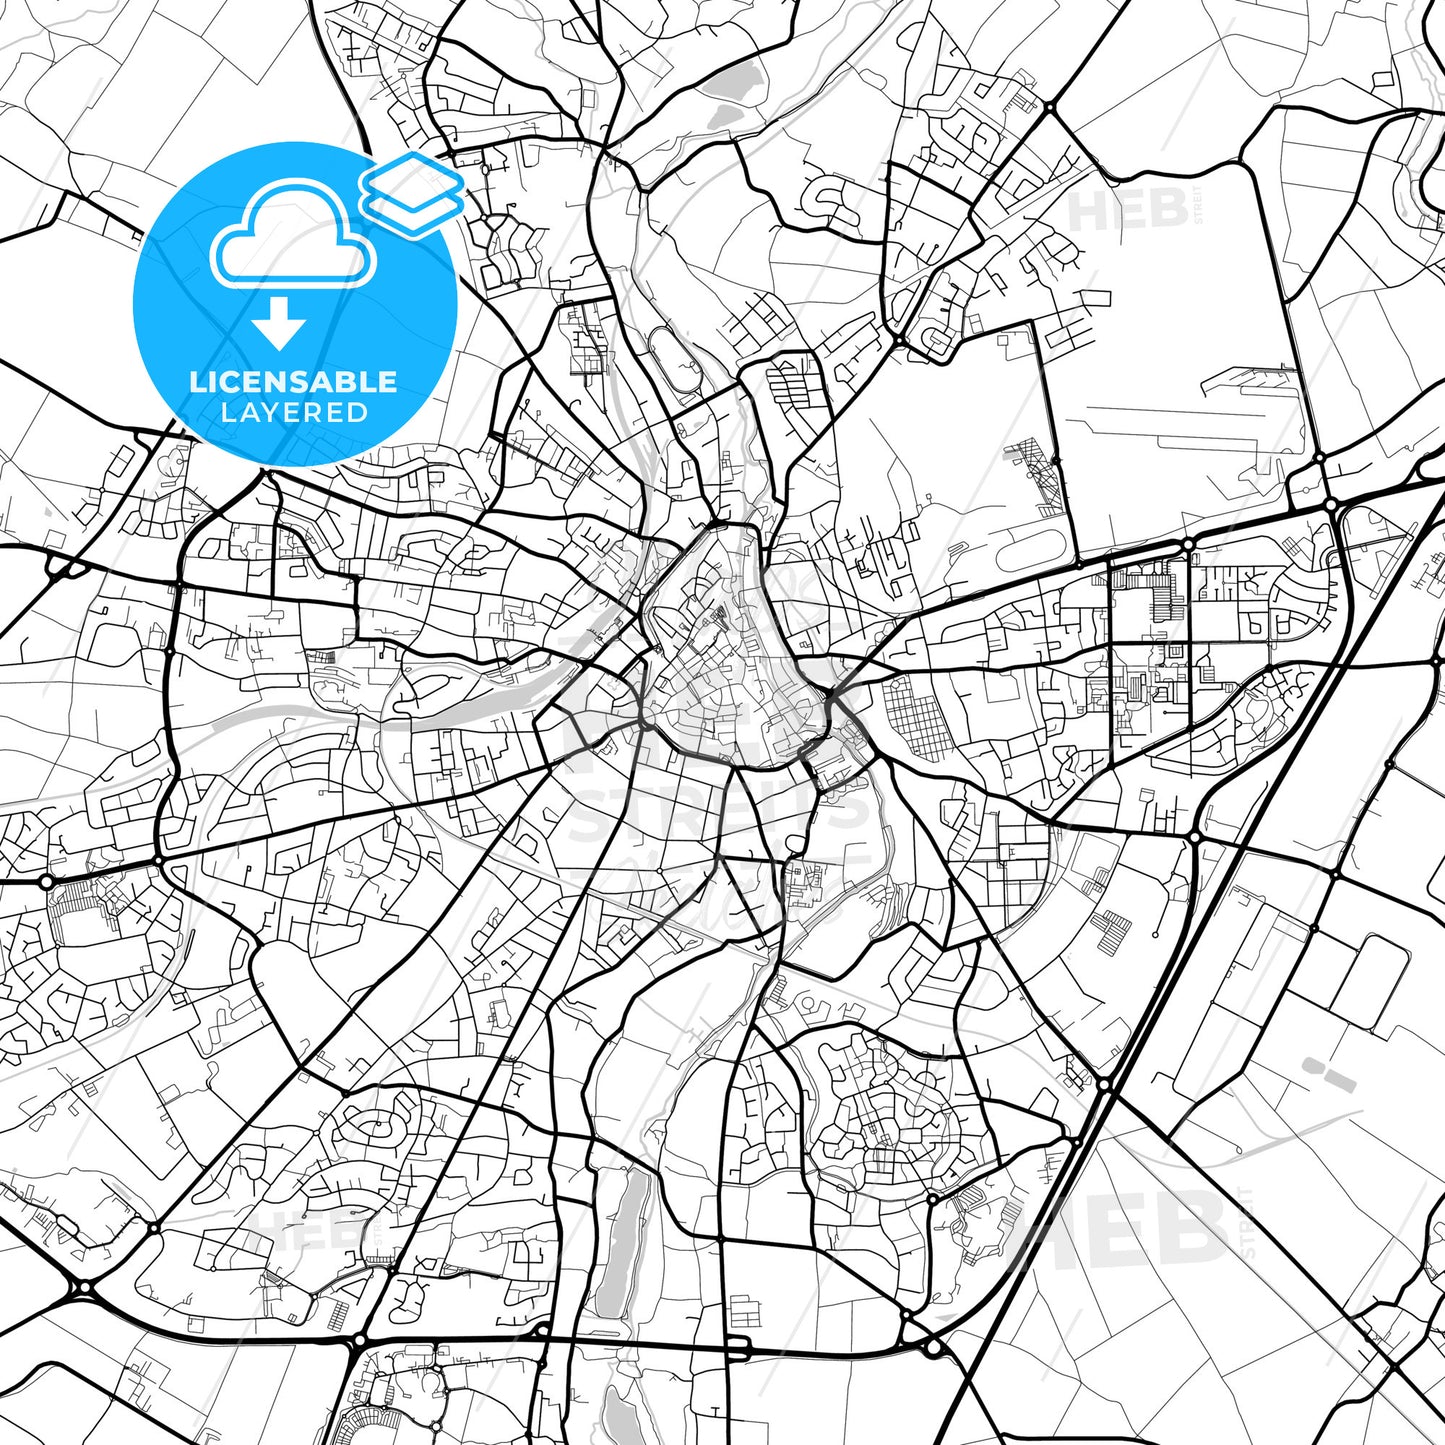 Layered PDF map of Chartres, Eure-et-Loir, France